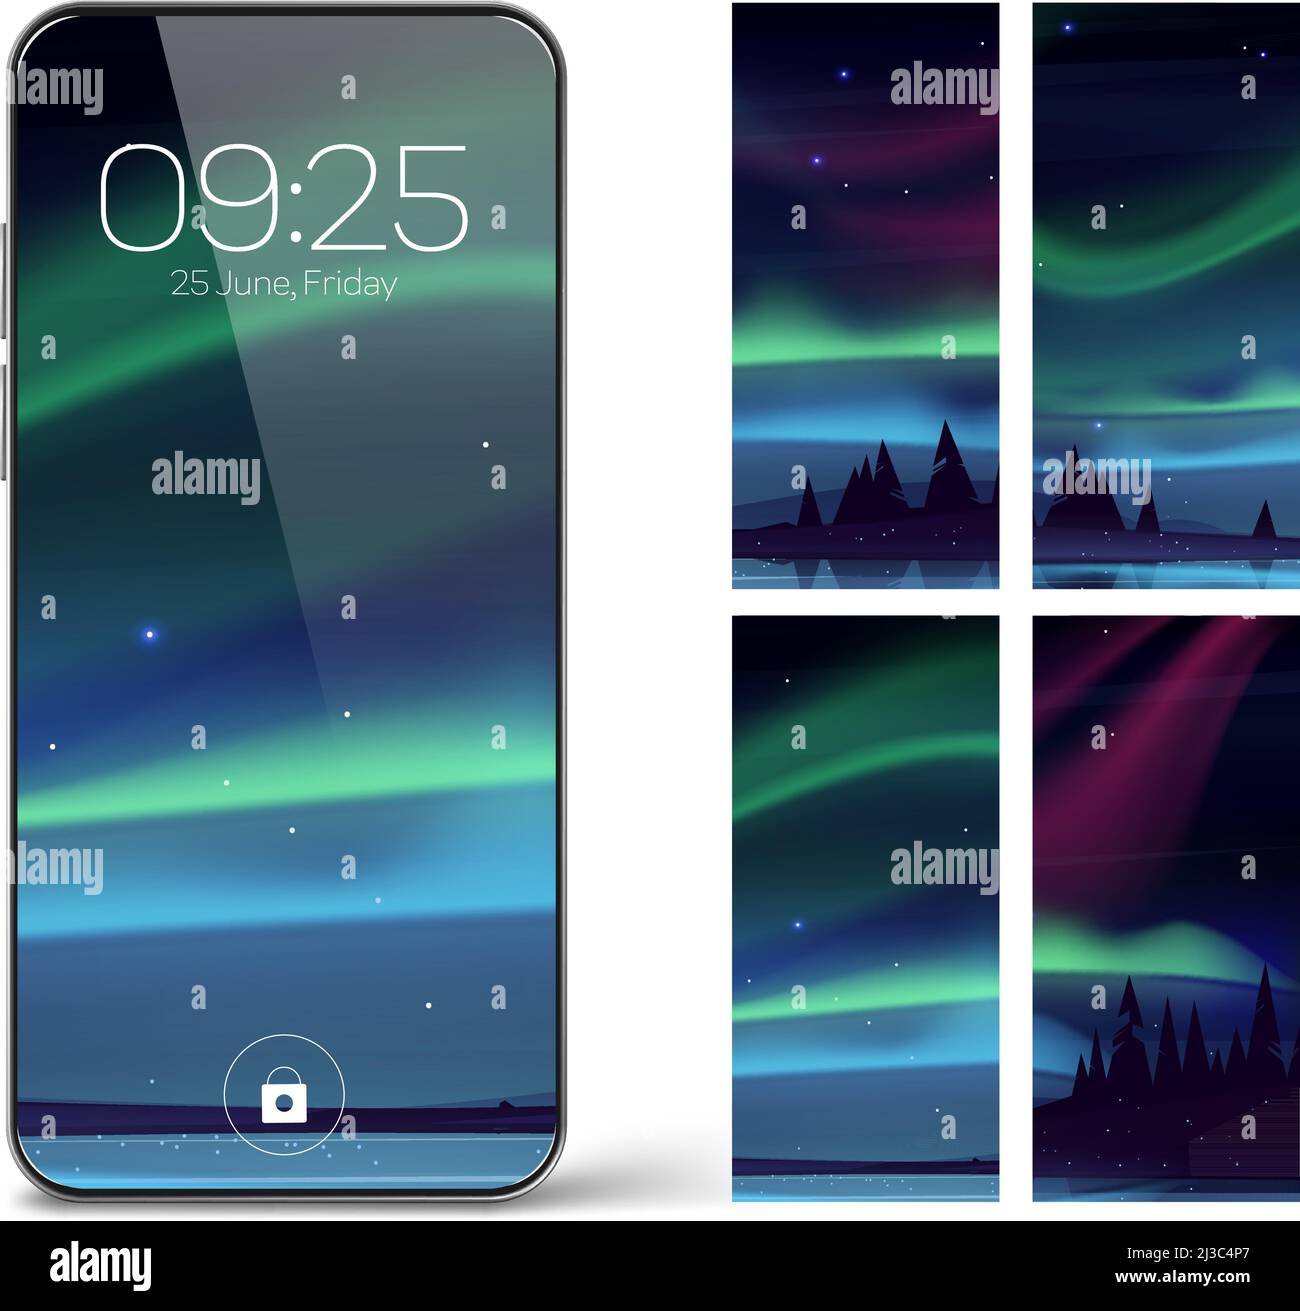 Smartphone lock screen with aurora borealis. Mobile phone onboard page with date and time, northern lights wallpapers background for cellphone device, Stock Vector